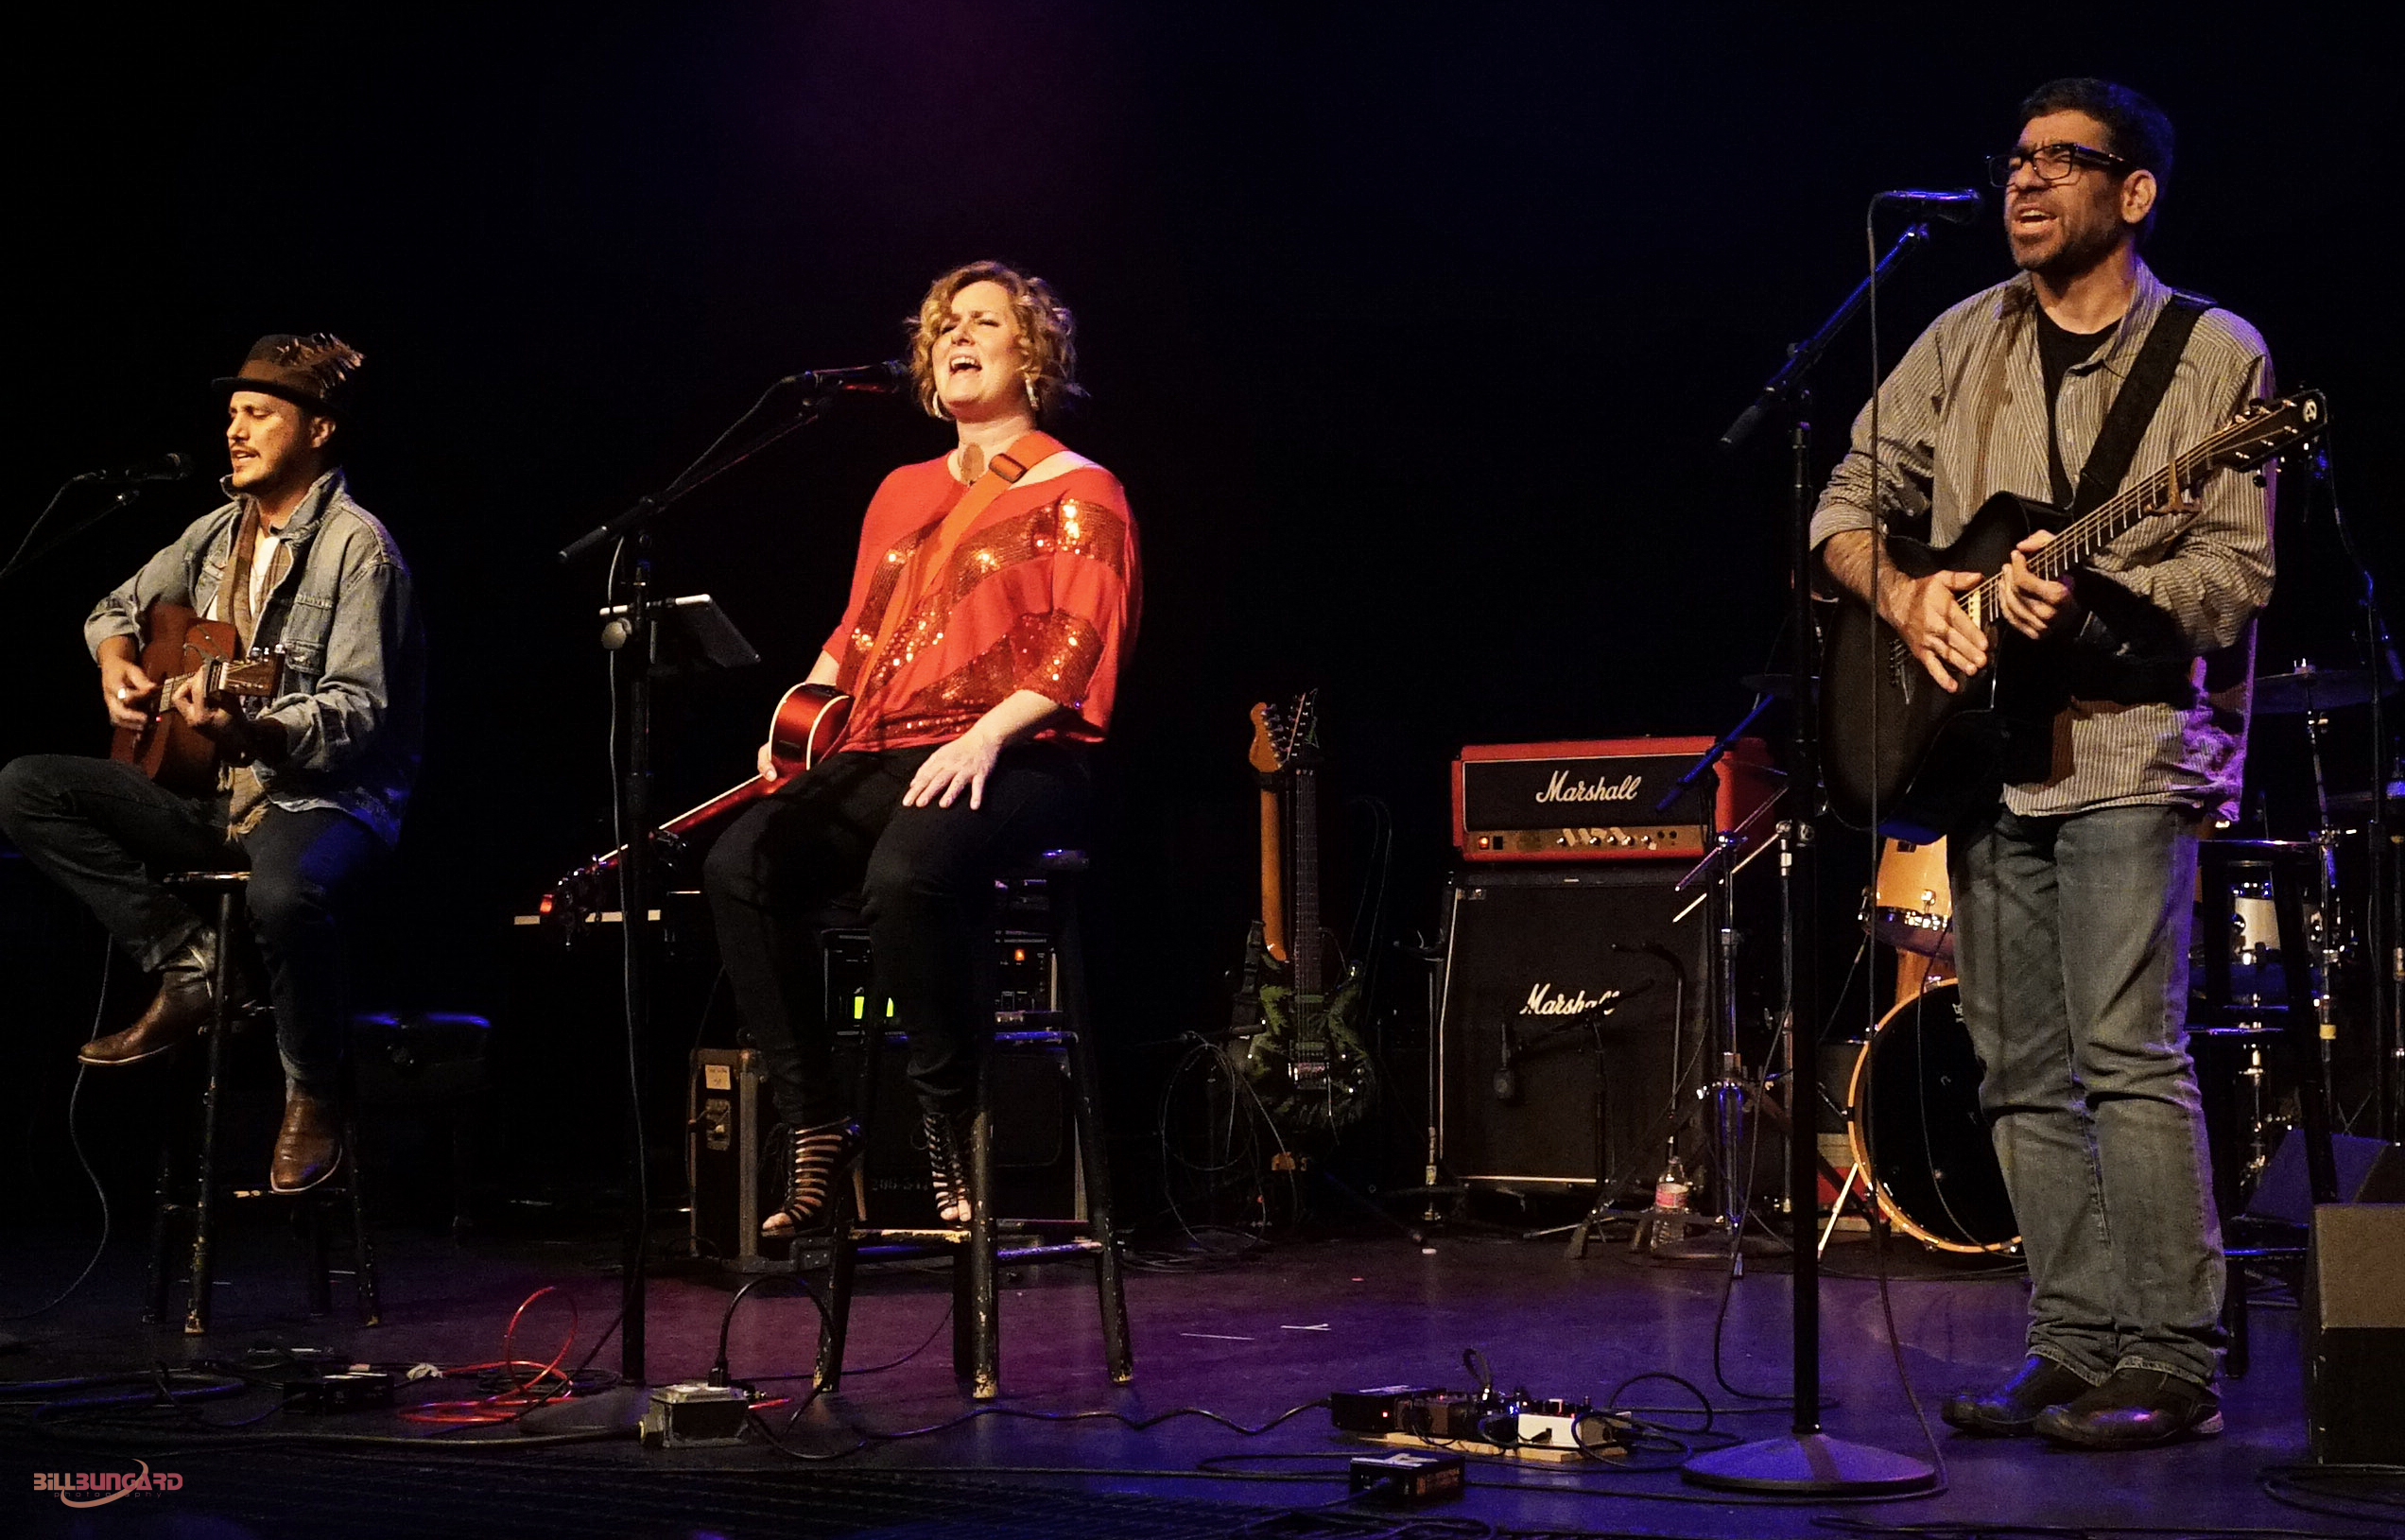 Eric Lilavois, Jessica Lynne, and Tobias the Owl at The Triple Door (Photo by Bill Bungard)